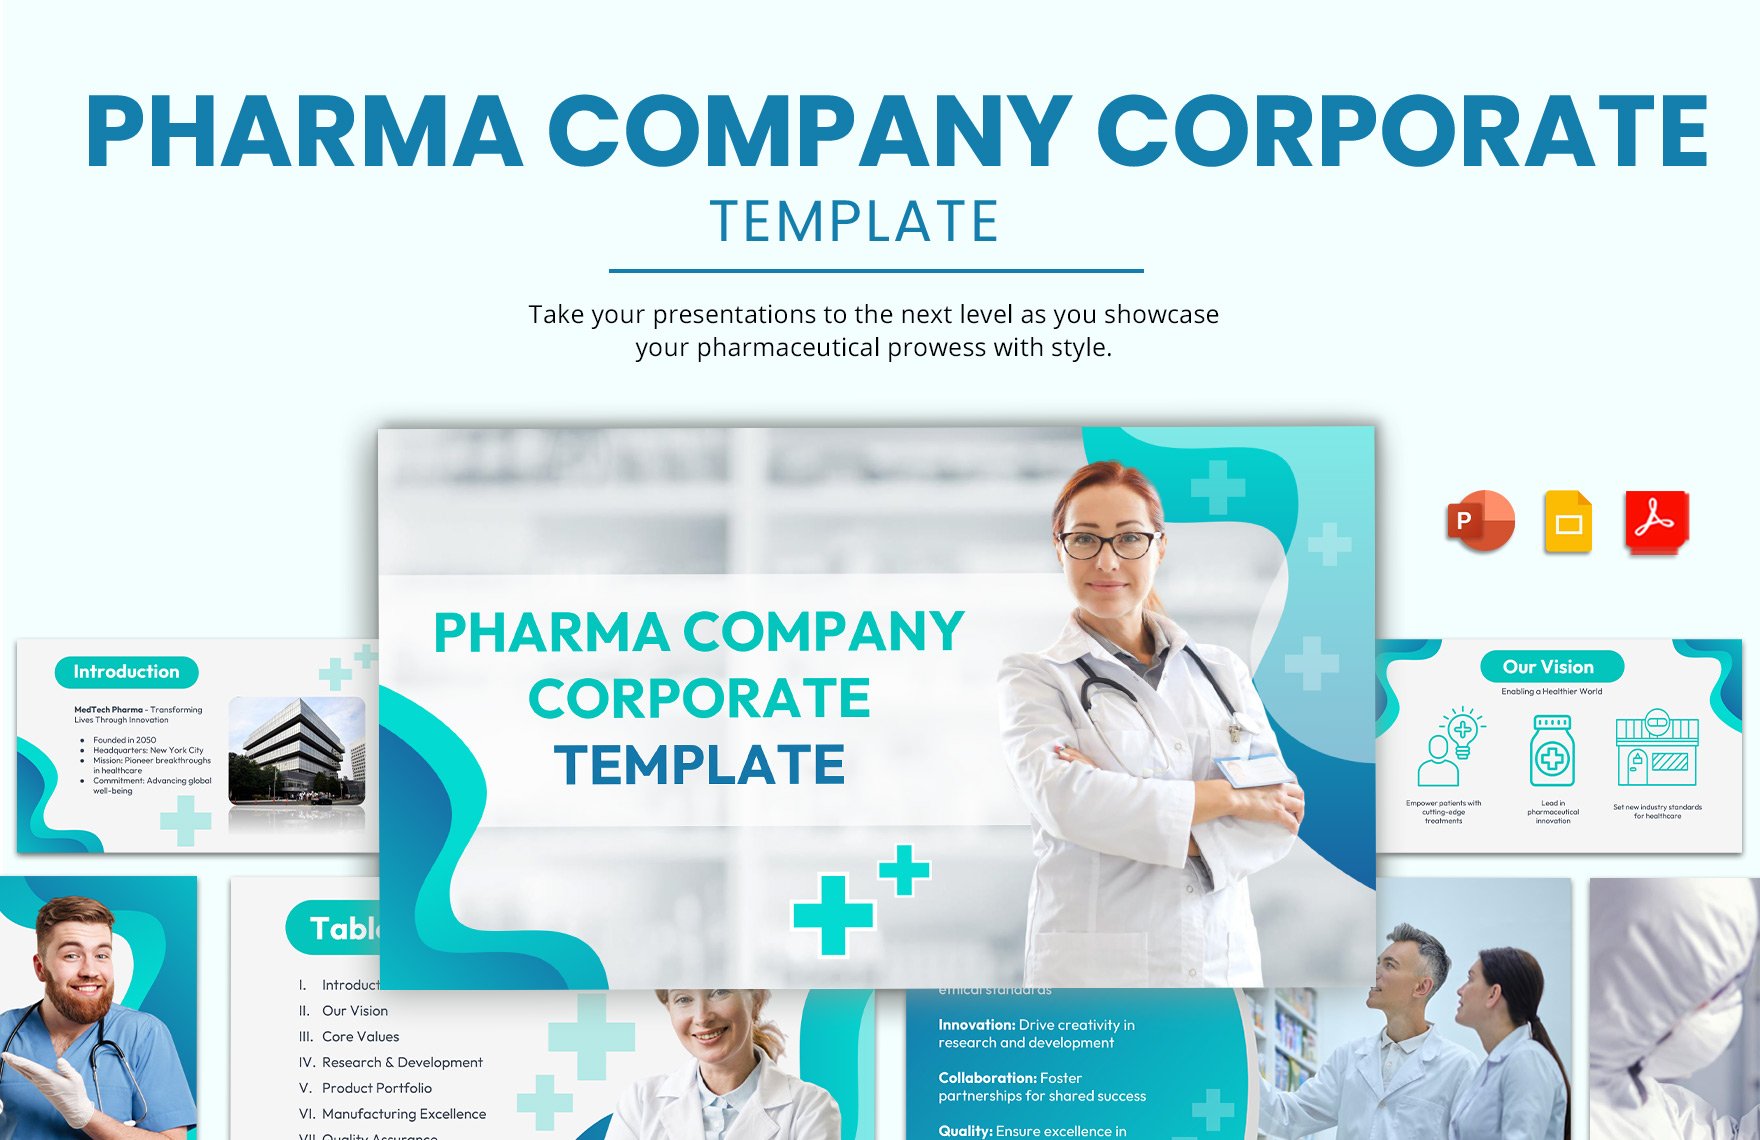 Free Pharma Company Corporate Template in PDF, PowerPoint, Google Slides